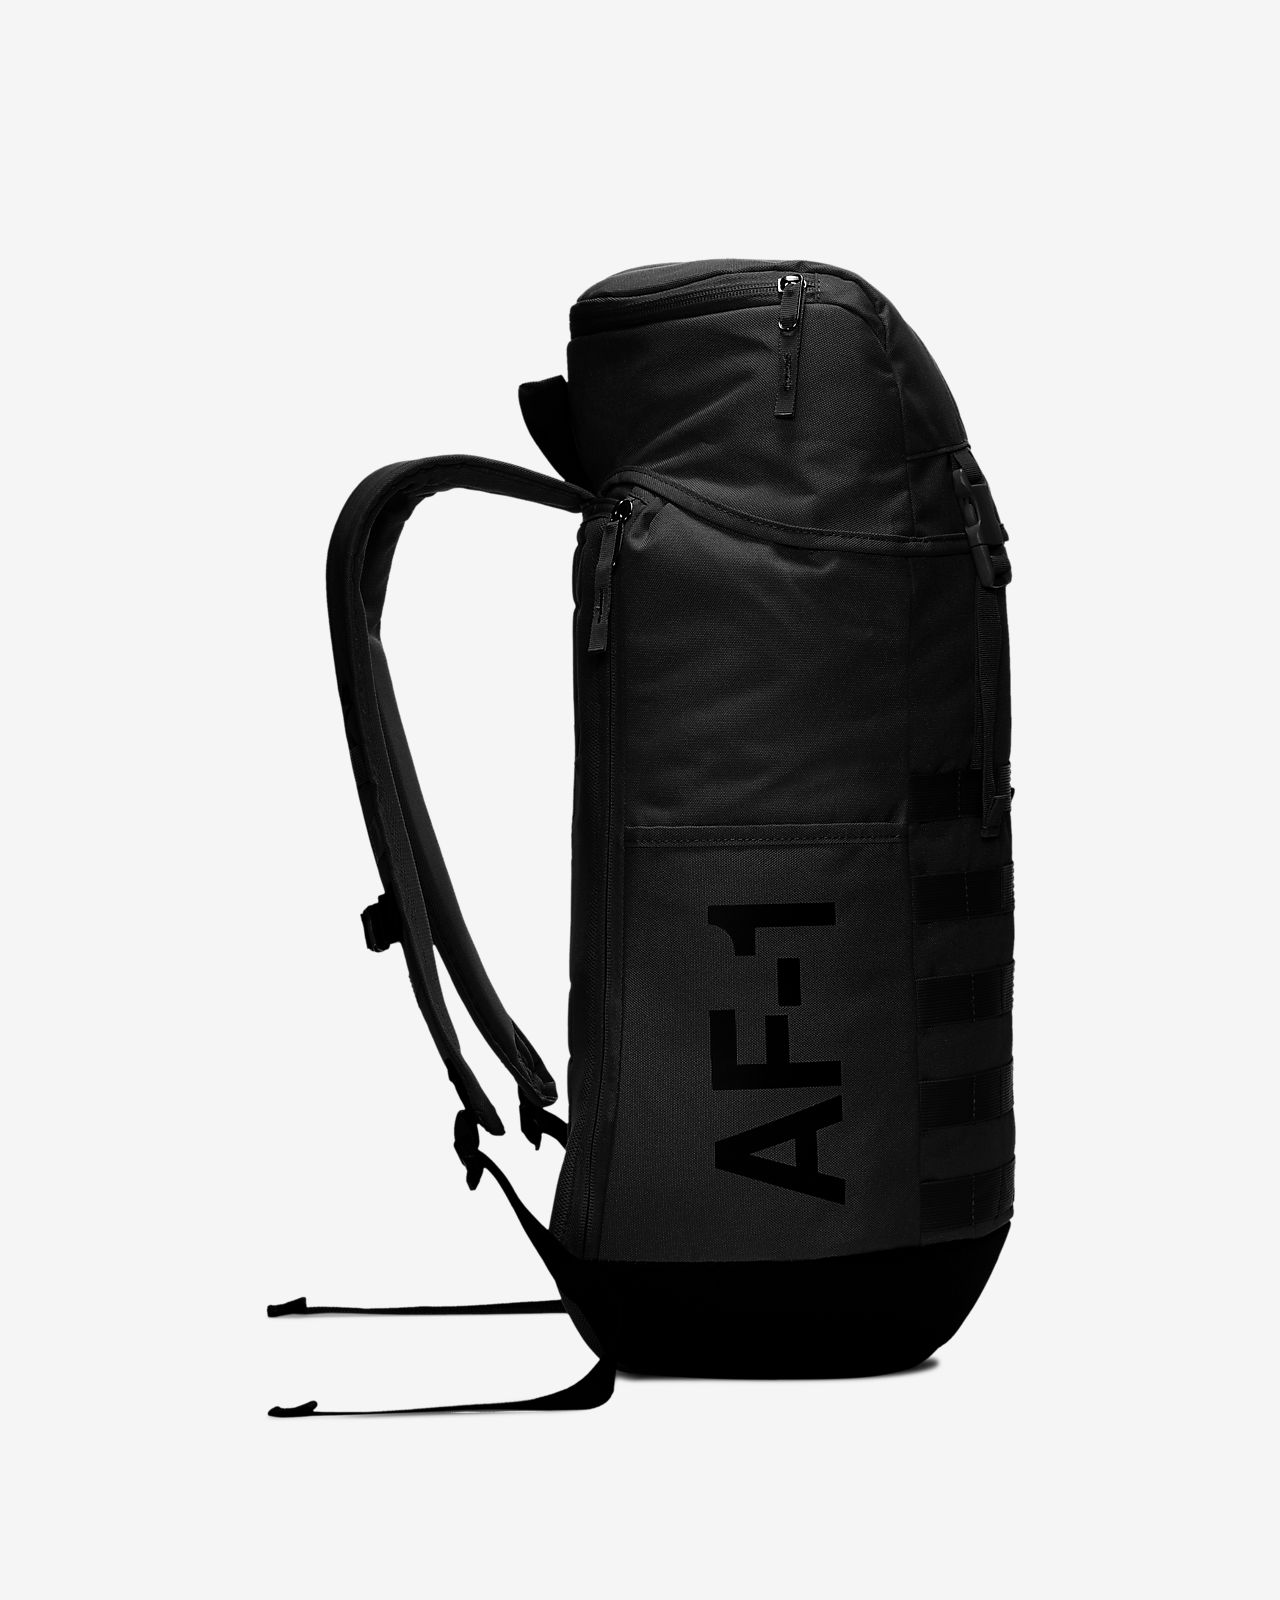 air force 1 backpack review,Free 